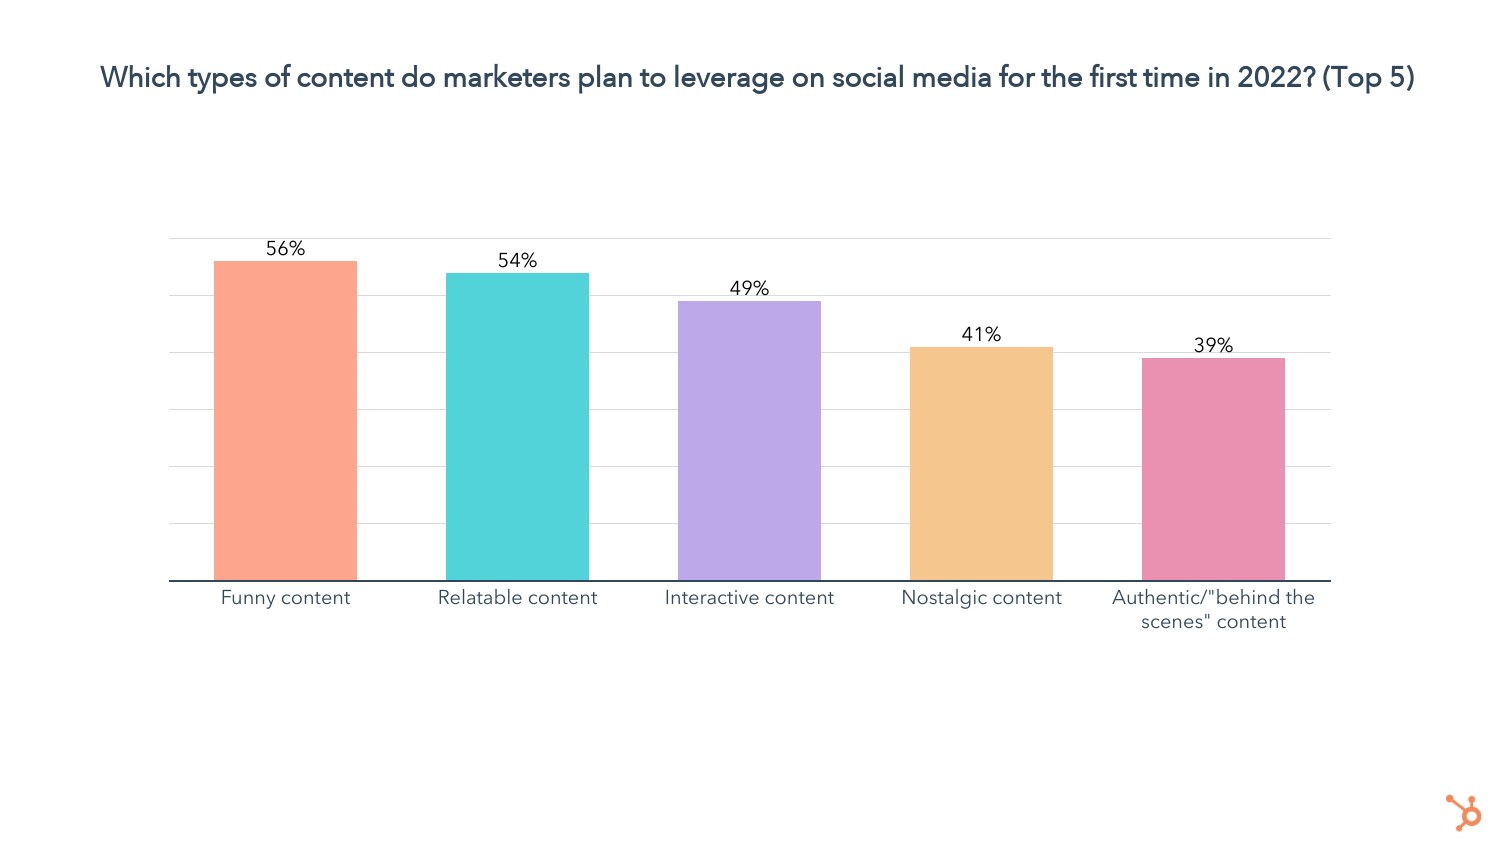 types of social media content marketers will invest in